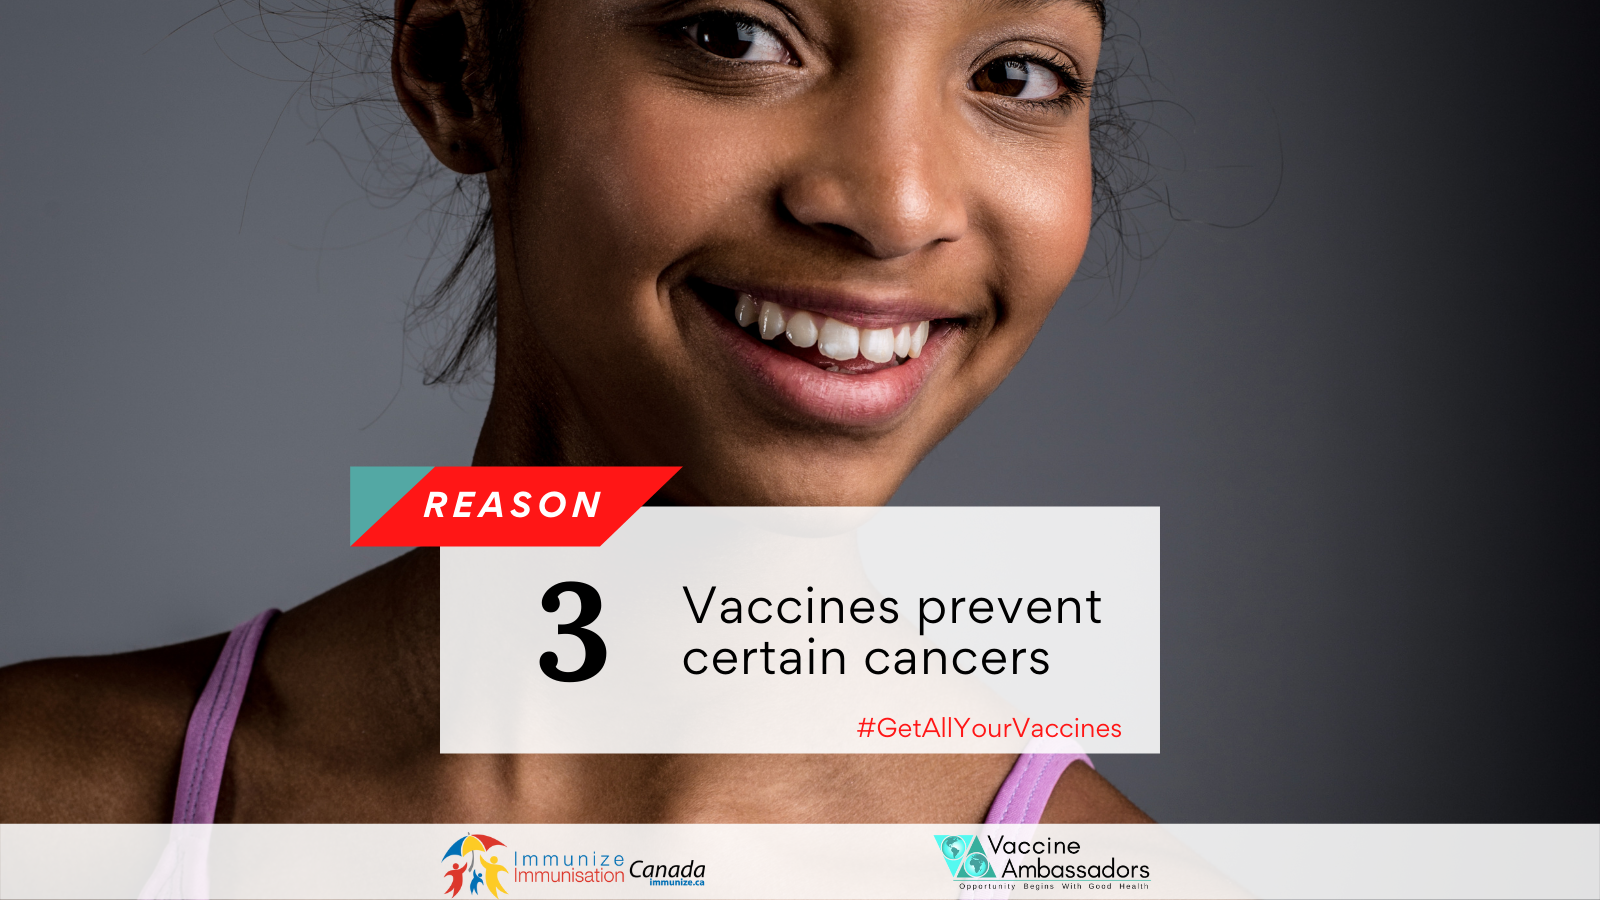 Reason 3 - Vaccines prevent certain cancers - Twitter